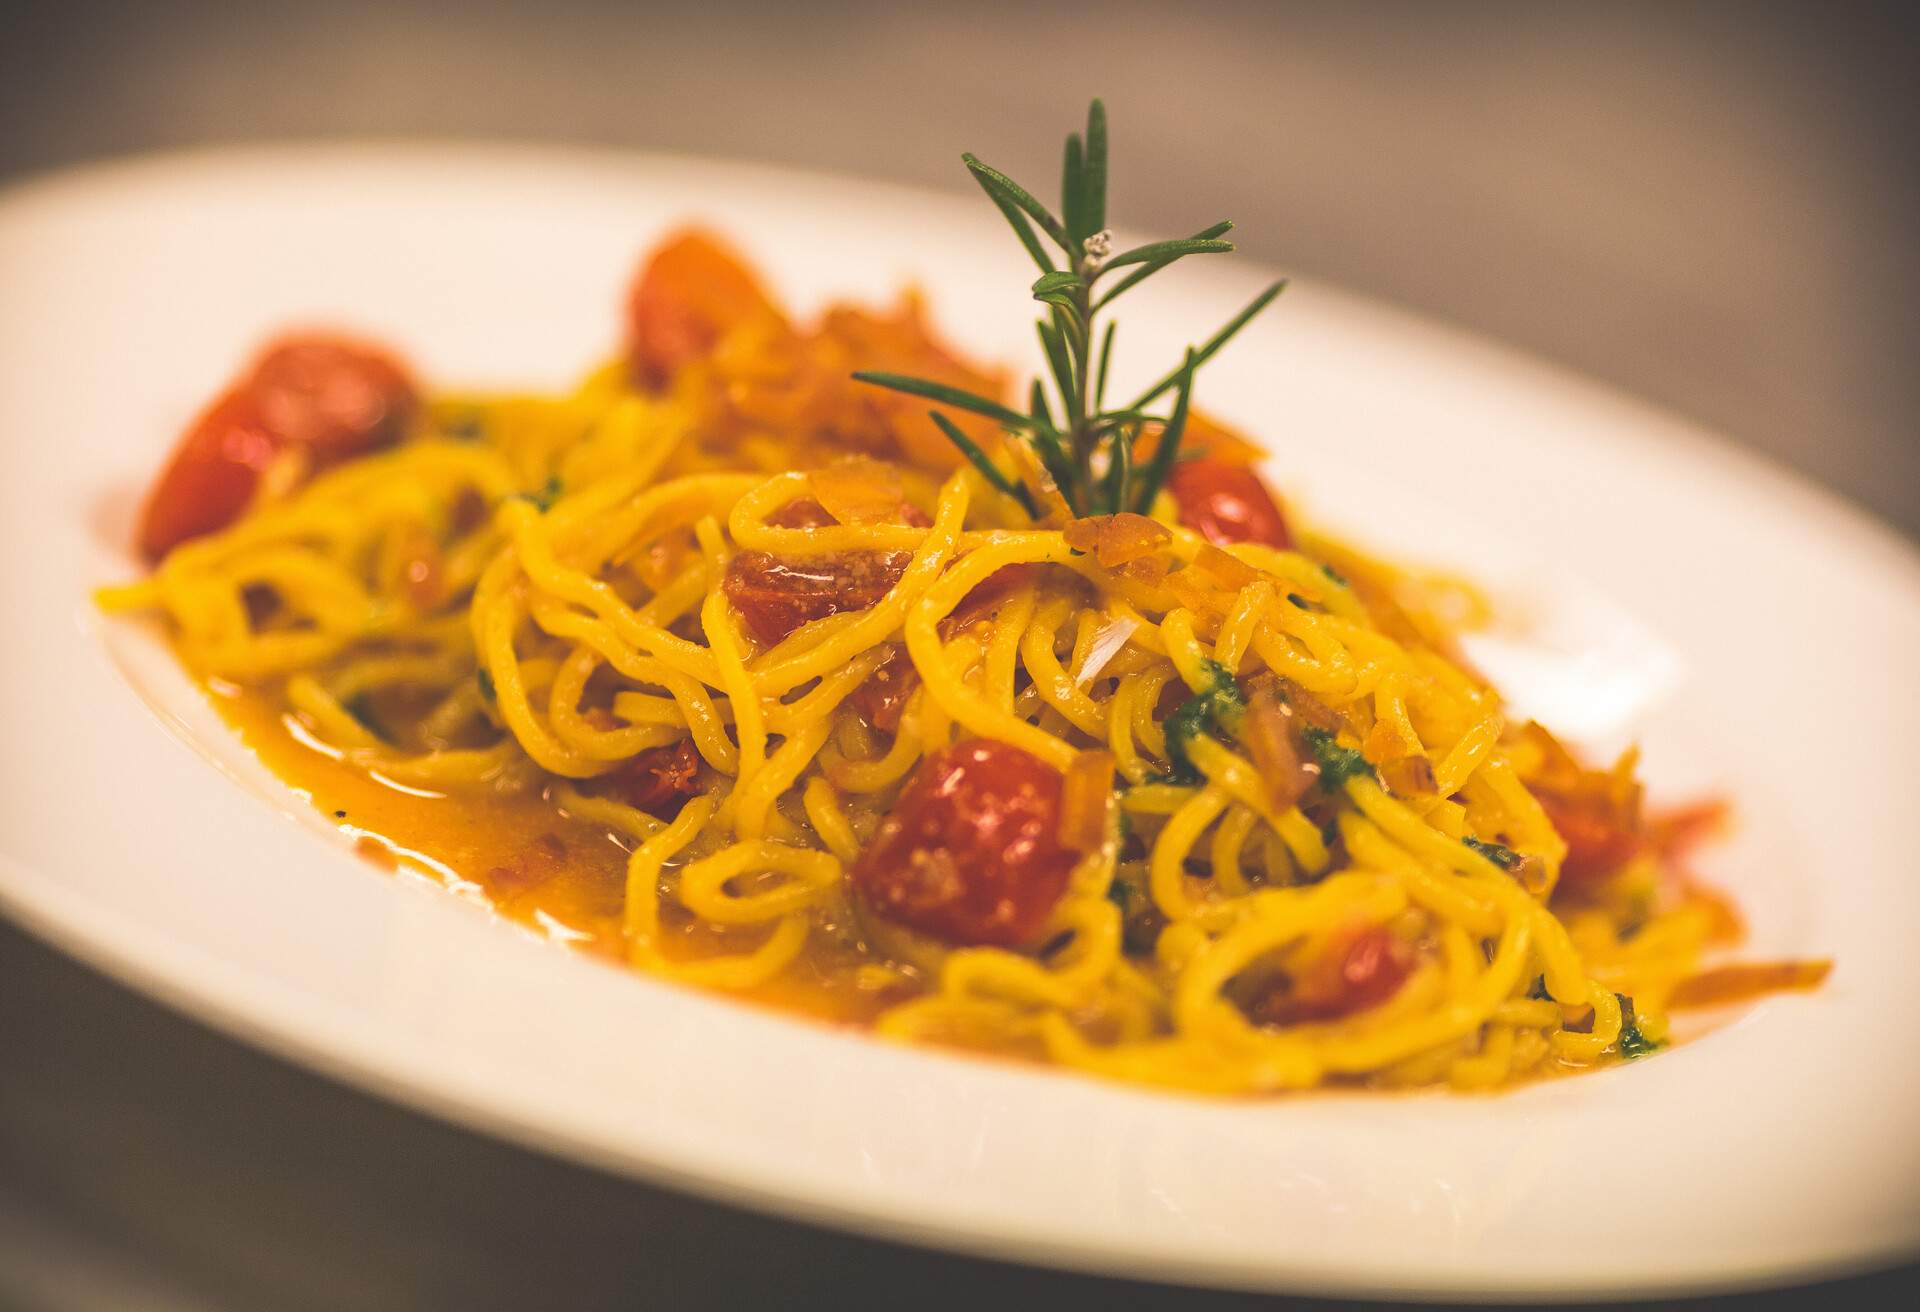 This picture shows spaghetti with bottarga in detail.